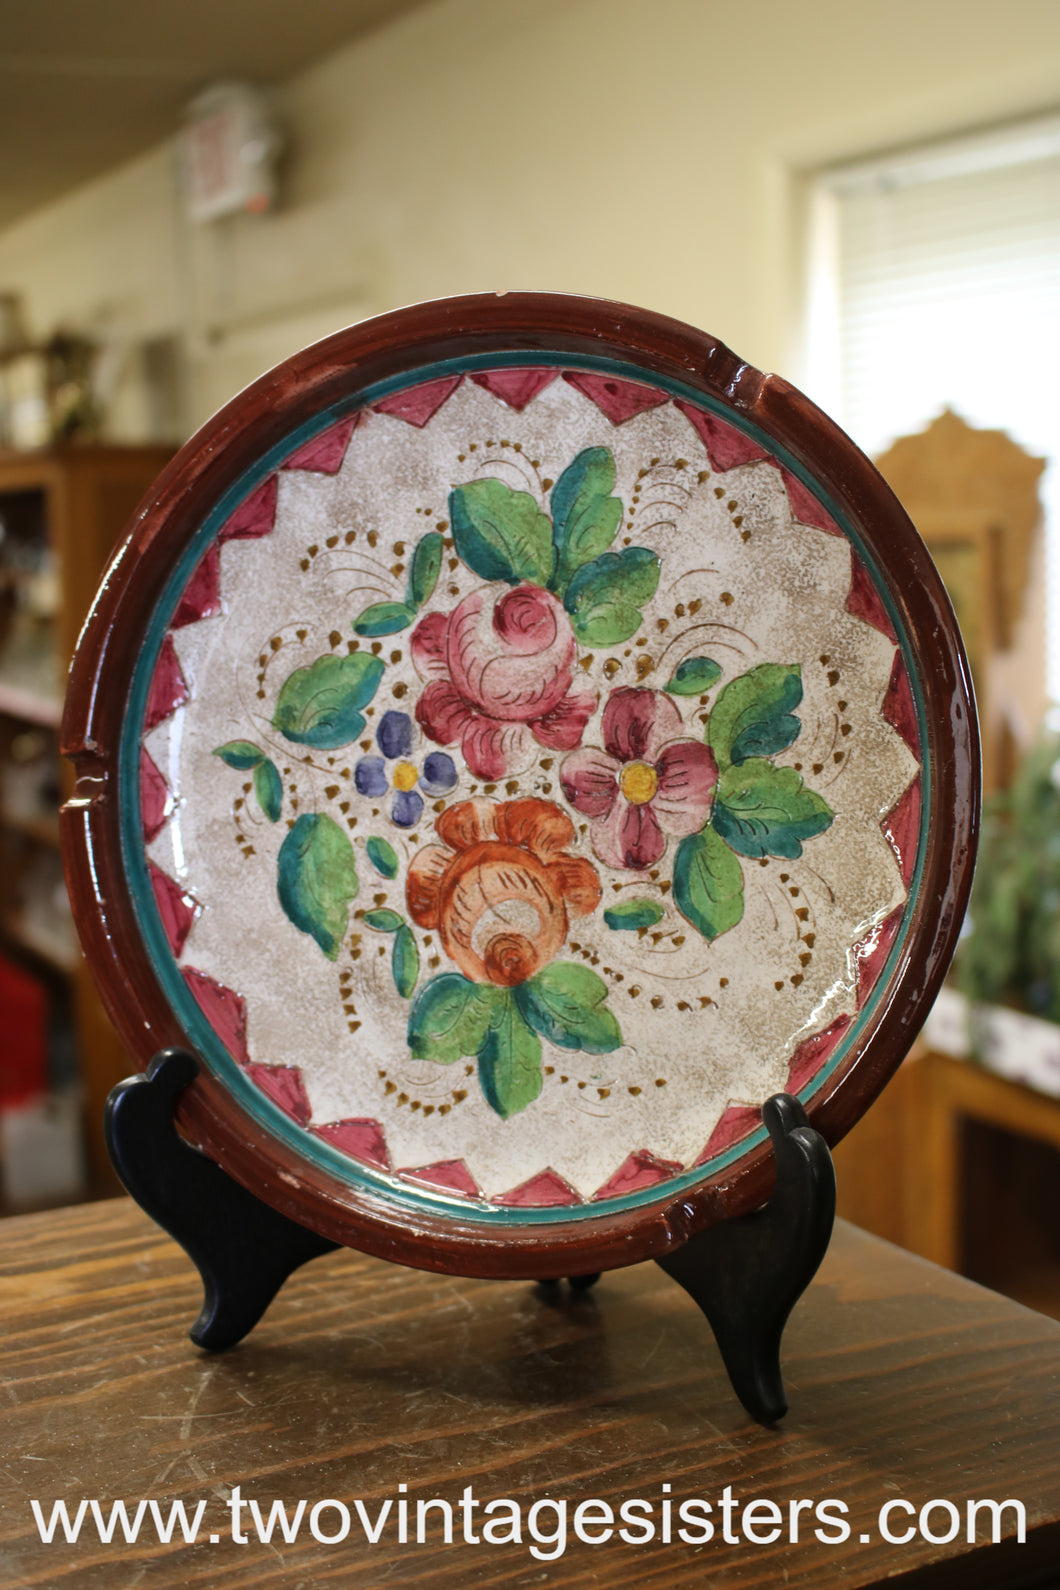 Mosaic Floral Ceramic Ash Tray Made in Italy